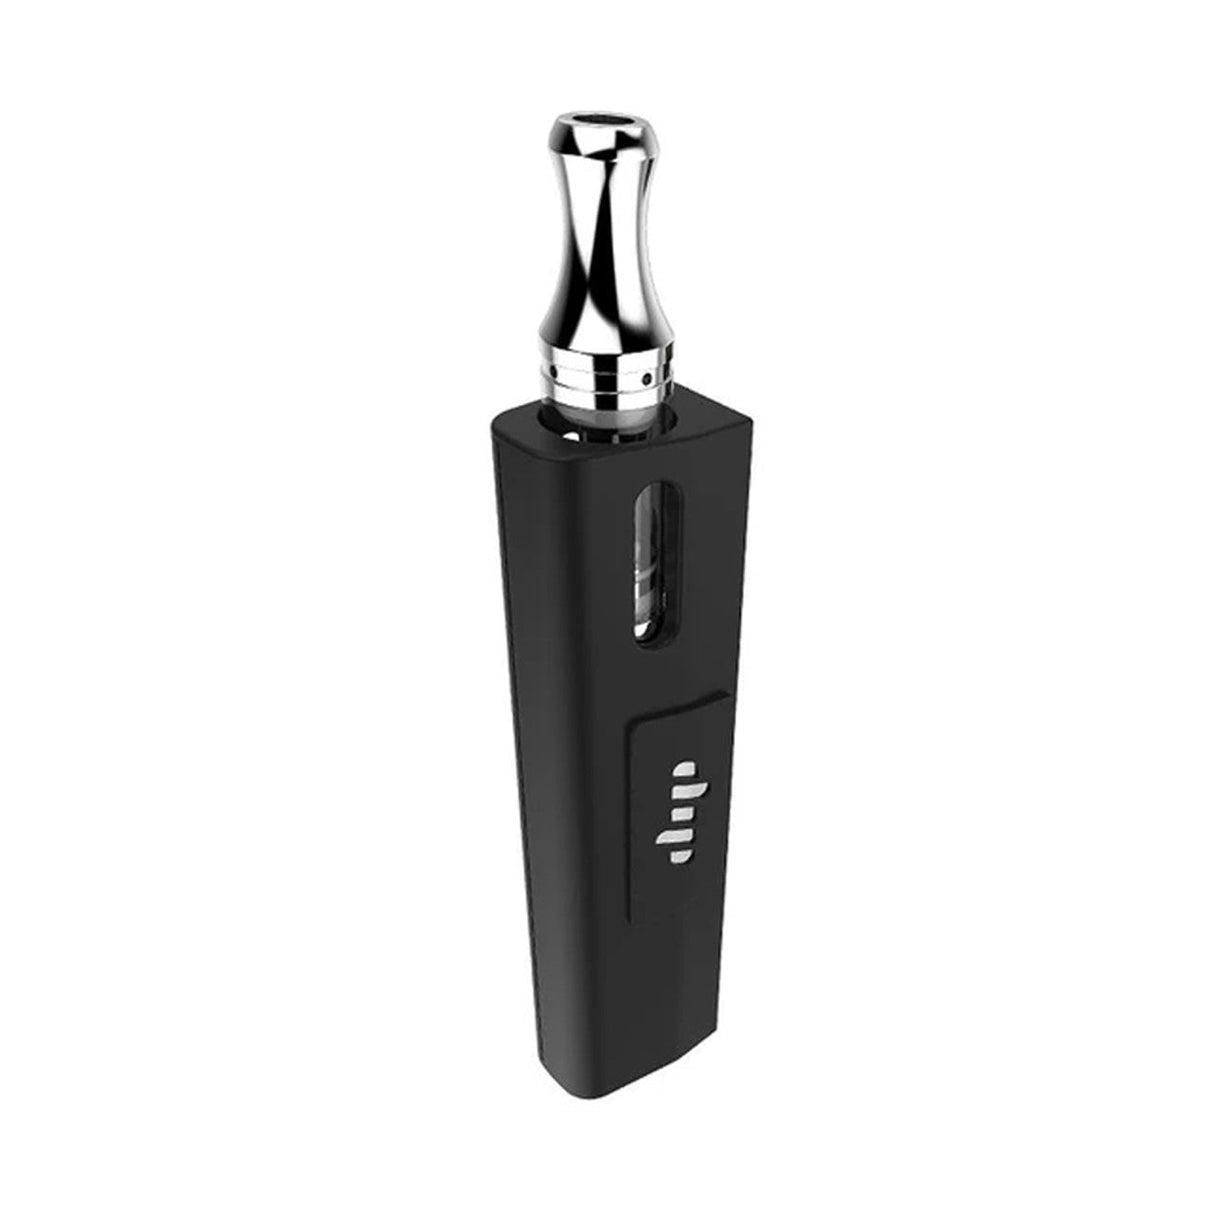 Evri 510 Pod Attachment by Dip Devices - Sleek Black Vaporizer with Grommet Joint for Concentrates